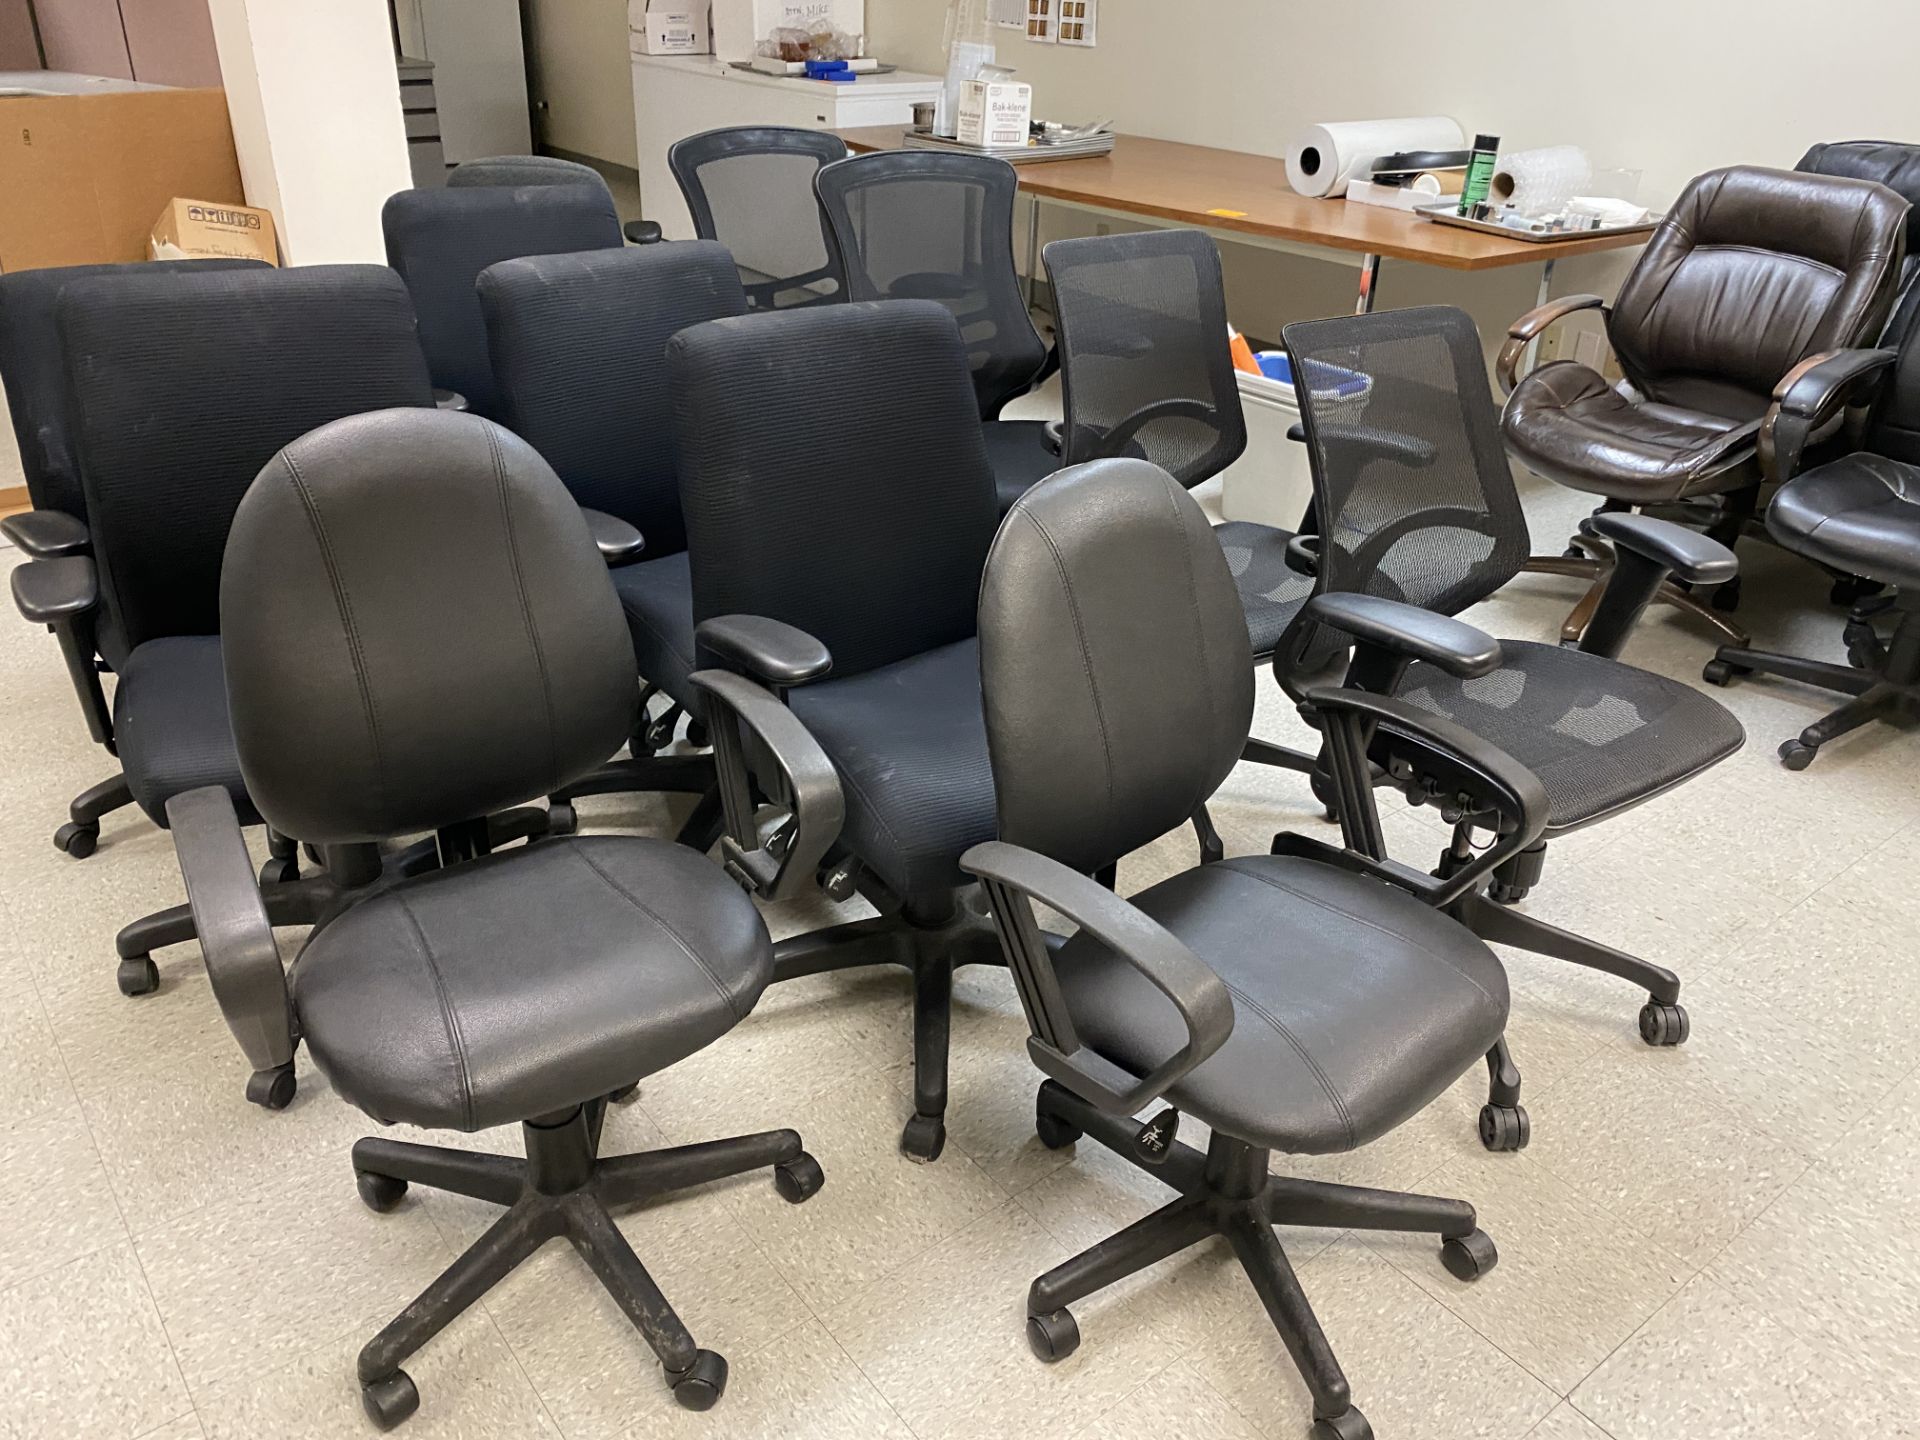 [LOT] (17) Office chairs [Rigging Fee: $30]